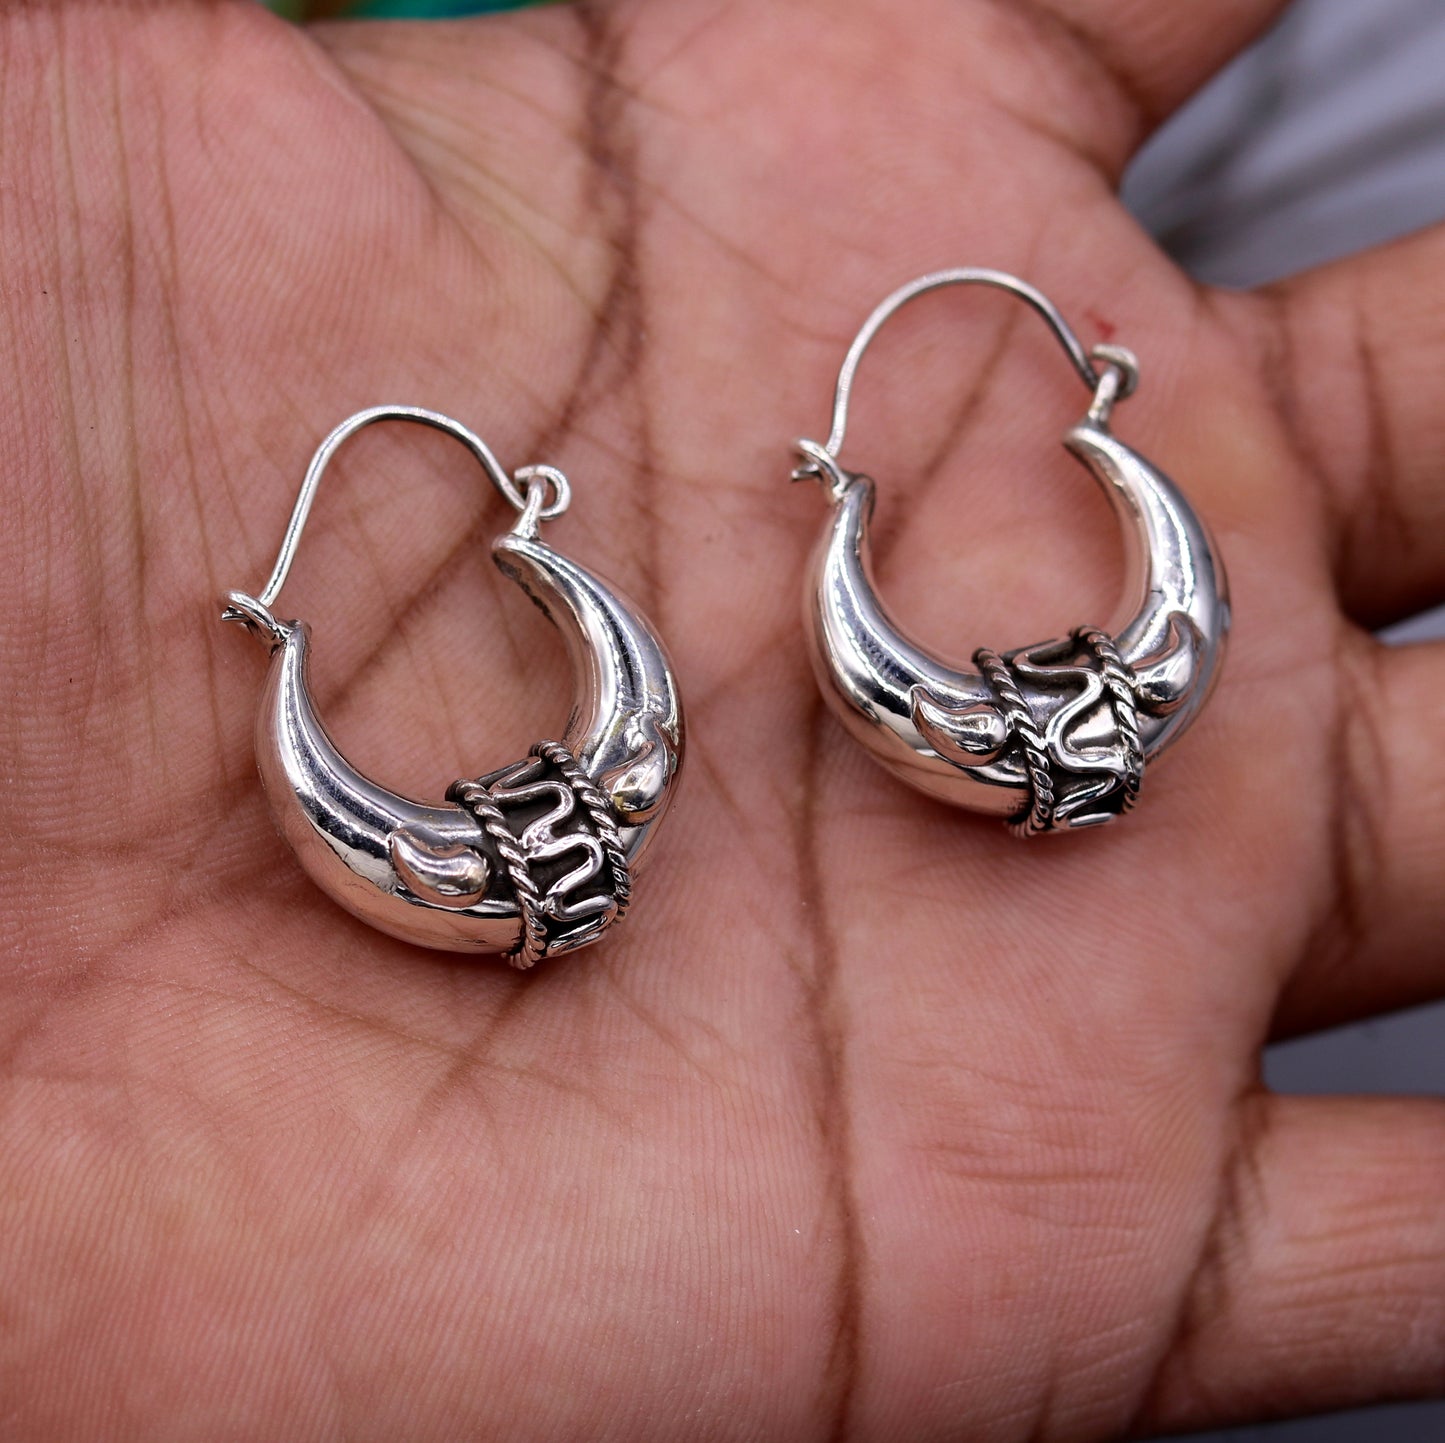 925 sterling pure silver handmade vintage style fabulous unisex hoops earrings kundal, ethnic bali tribal jewelry from india s586 - TRIBAL ORNAMENTS